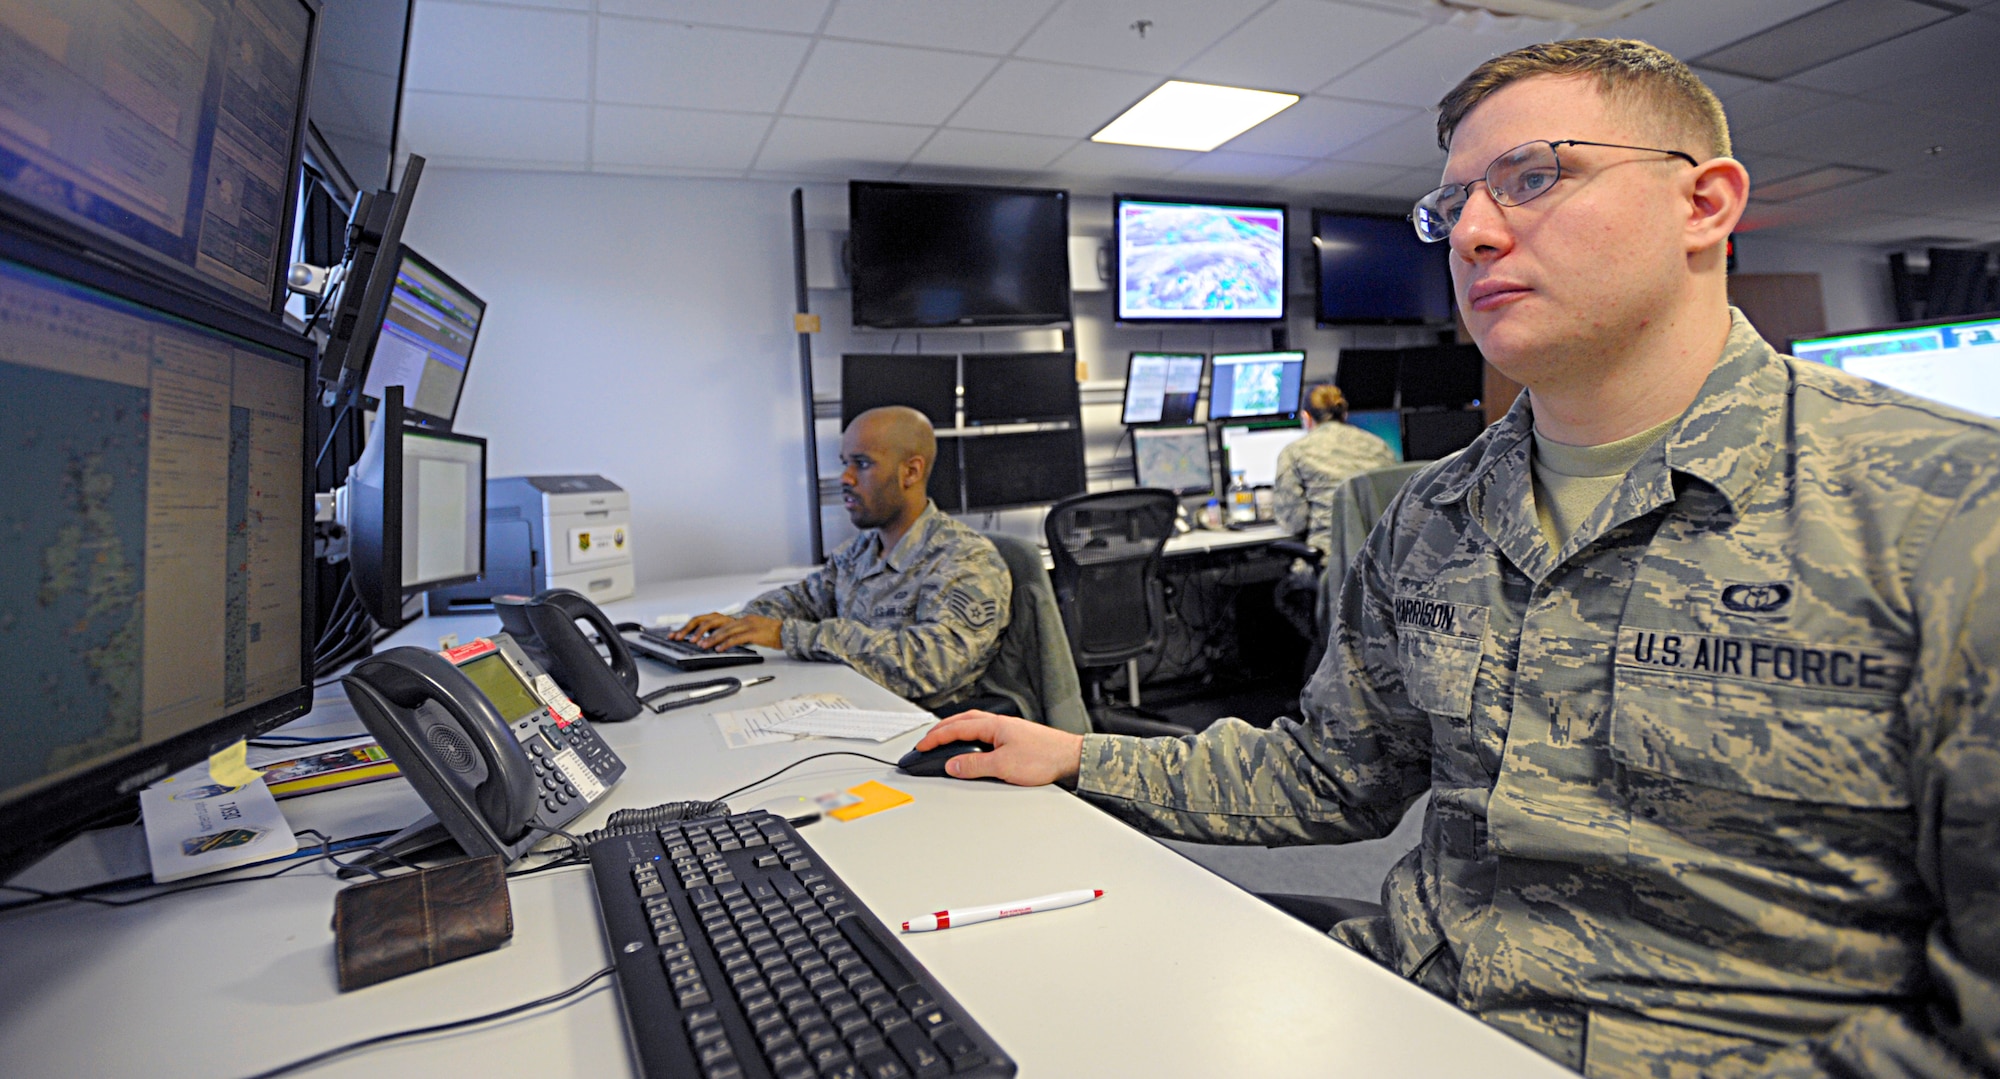 Airman 1st Class Benjamin Harrison, 21st Operational Weather Squadron weather forecaster, monitors the weather patterns for northern Europe Feb. 22, 2016, at Kapaun Air Station, Germany. Working with weather flights at various locations, the 21st OWS provides weather intelligence for Department of Defense operations throughout the U.S. European Command and U.S. Africa Command areas of responsibility. (U.S. Air Force photo/Staff Sgt. Timothy Moore)